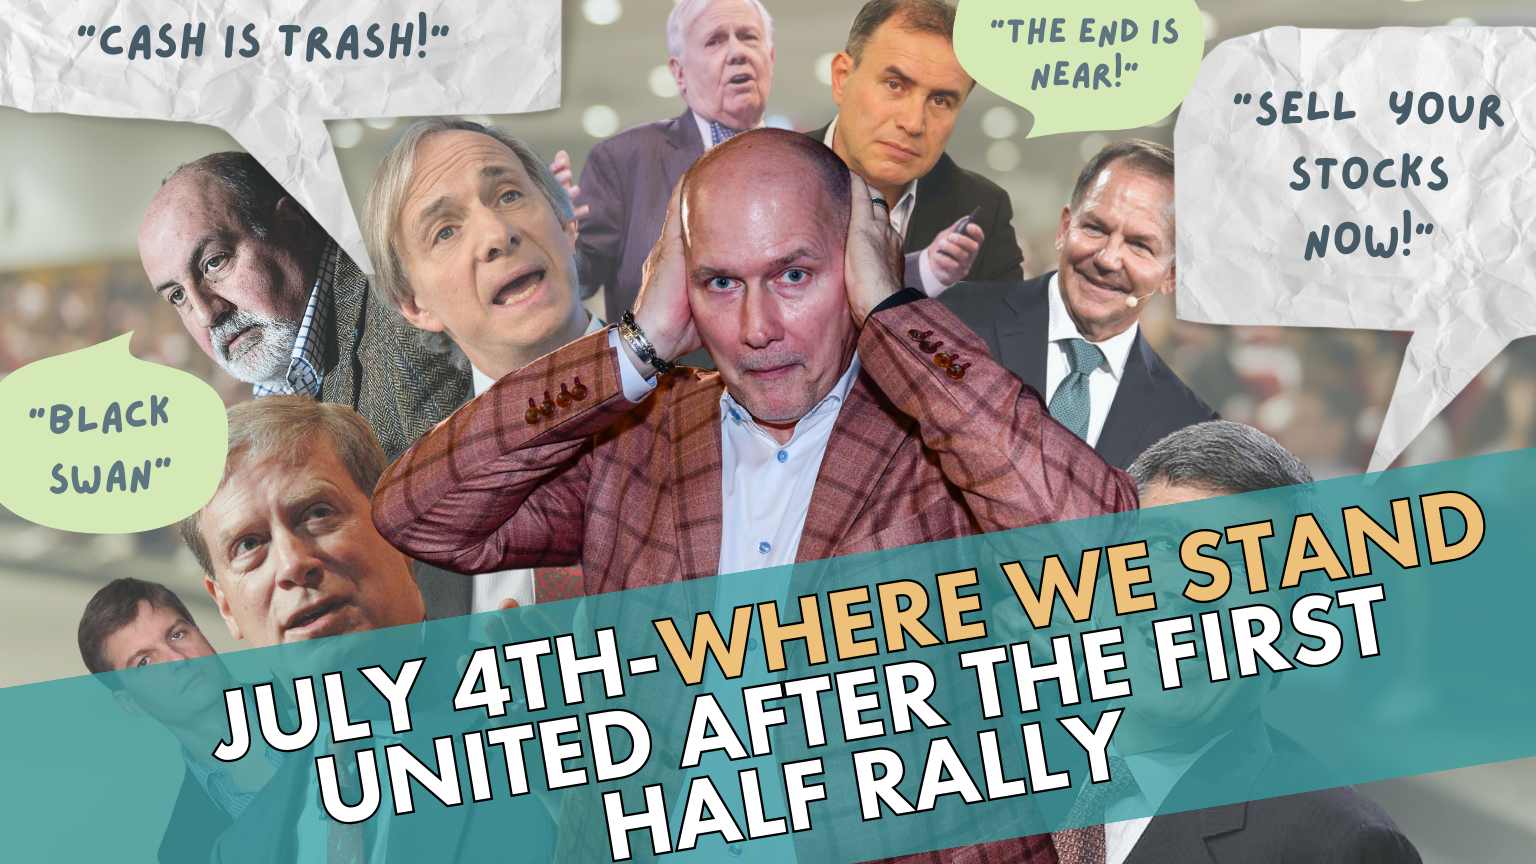 July 4th - Where we stand united after the first half rally